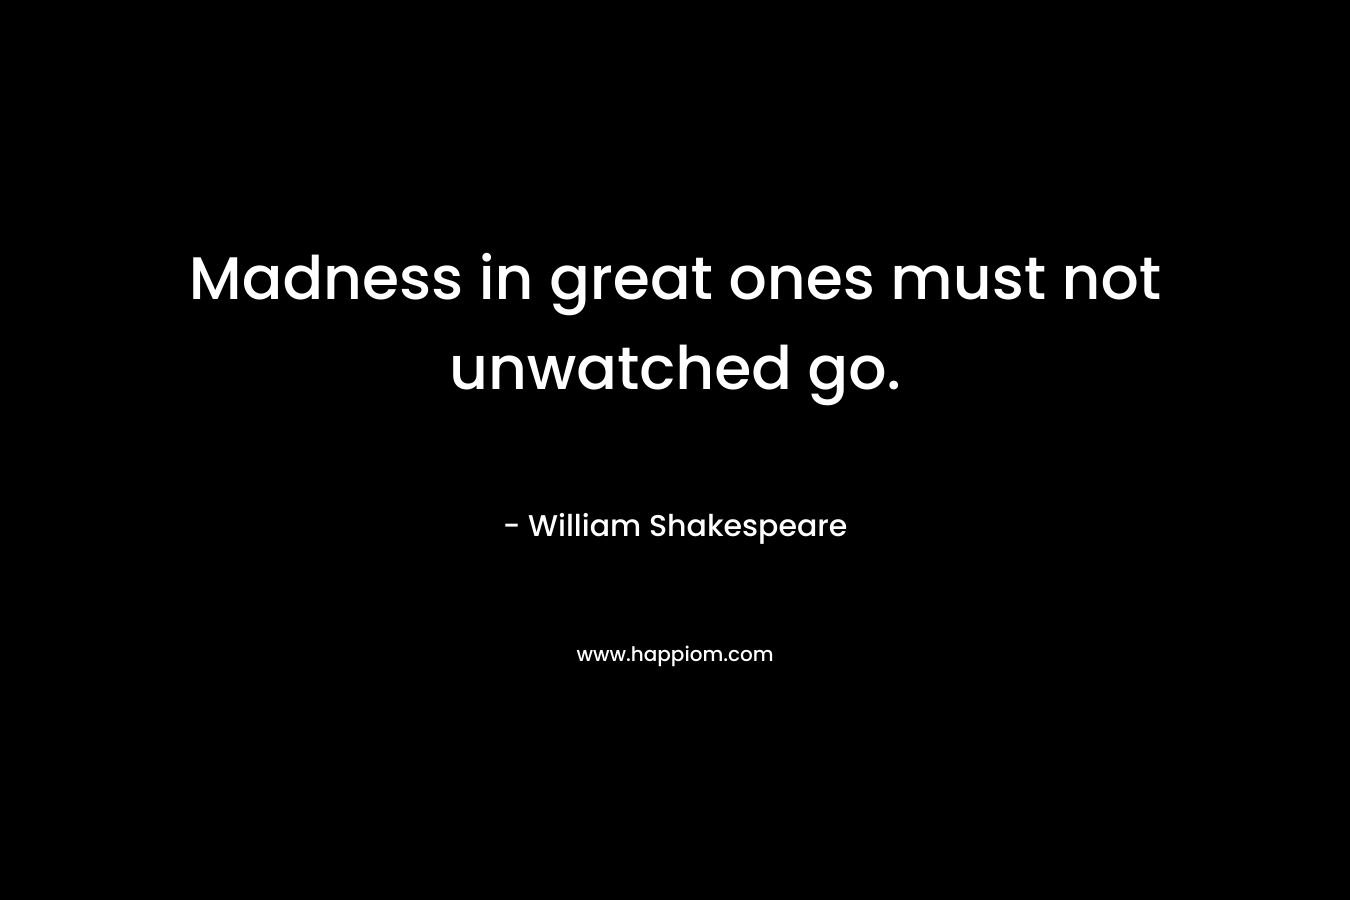 Madness in great ones must not unwatched go. – William Shakespeare